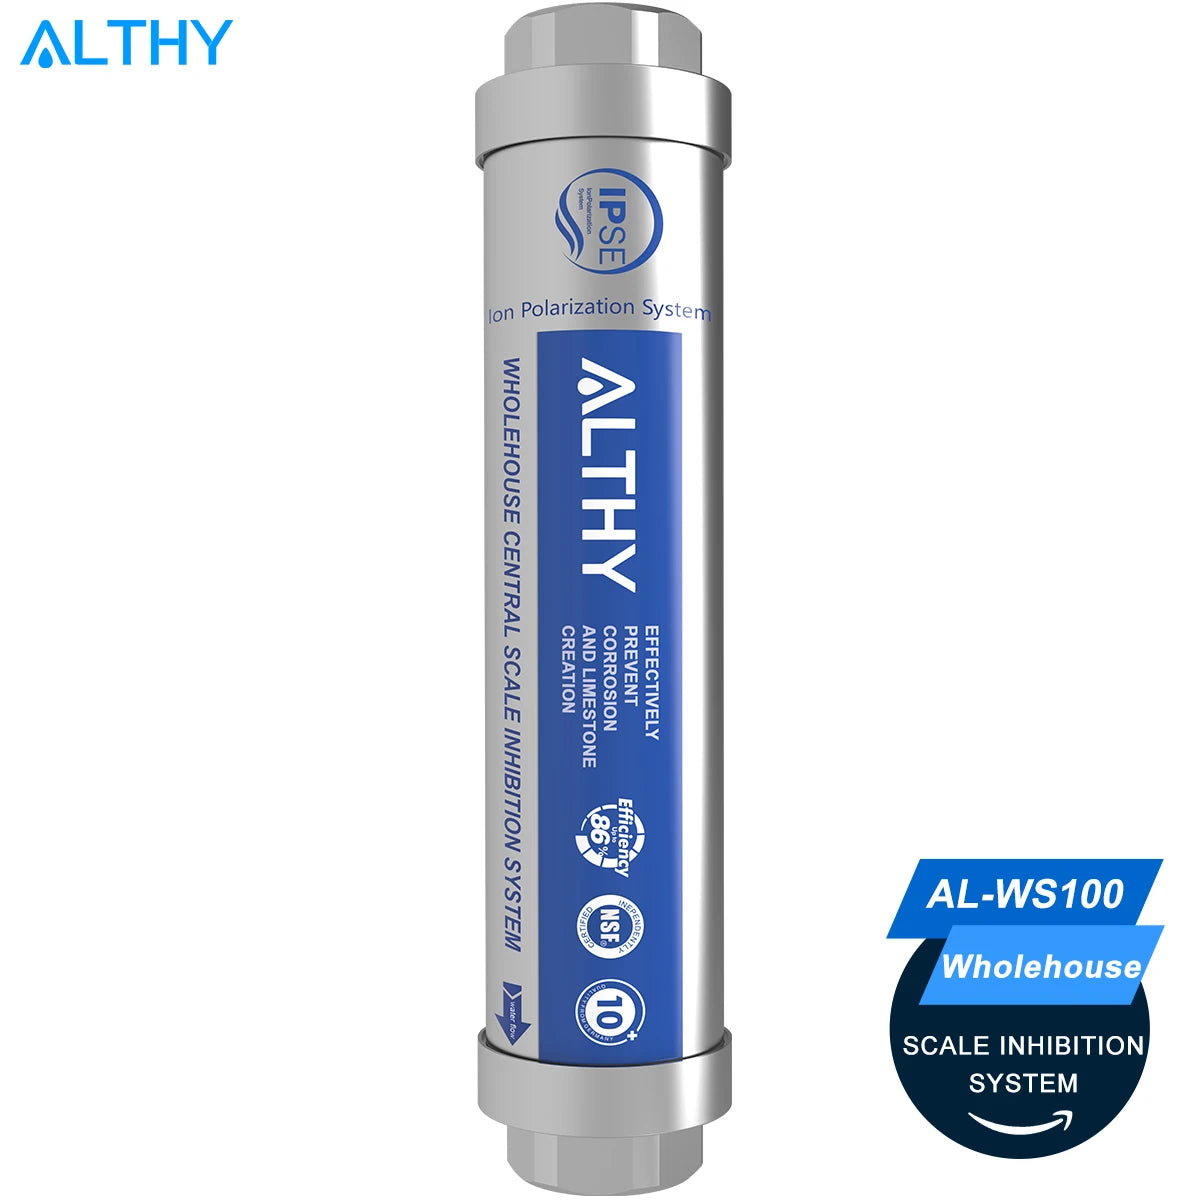 ALTHY AL-WS100 IPS Whole House Water Descaler Scale Inhibition Softener System Machine Anti Limescale Corrosion & Hard water WS100 CHINA